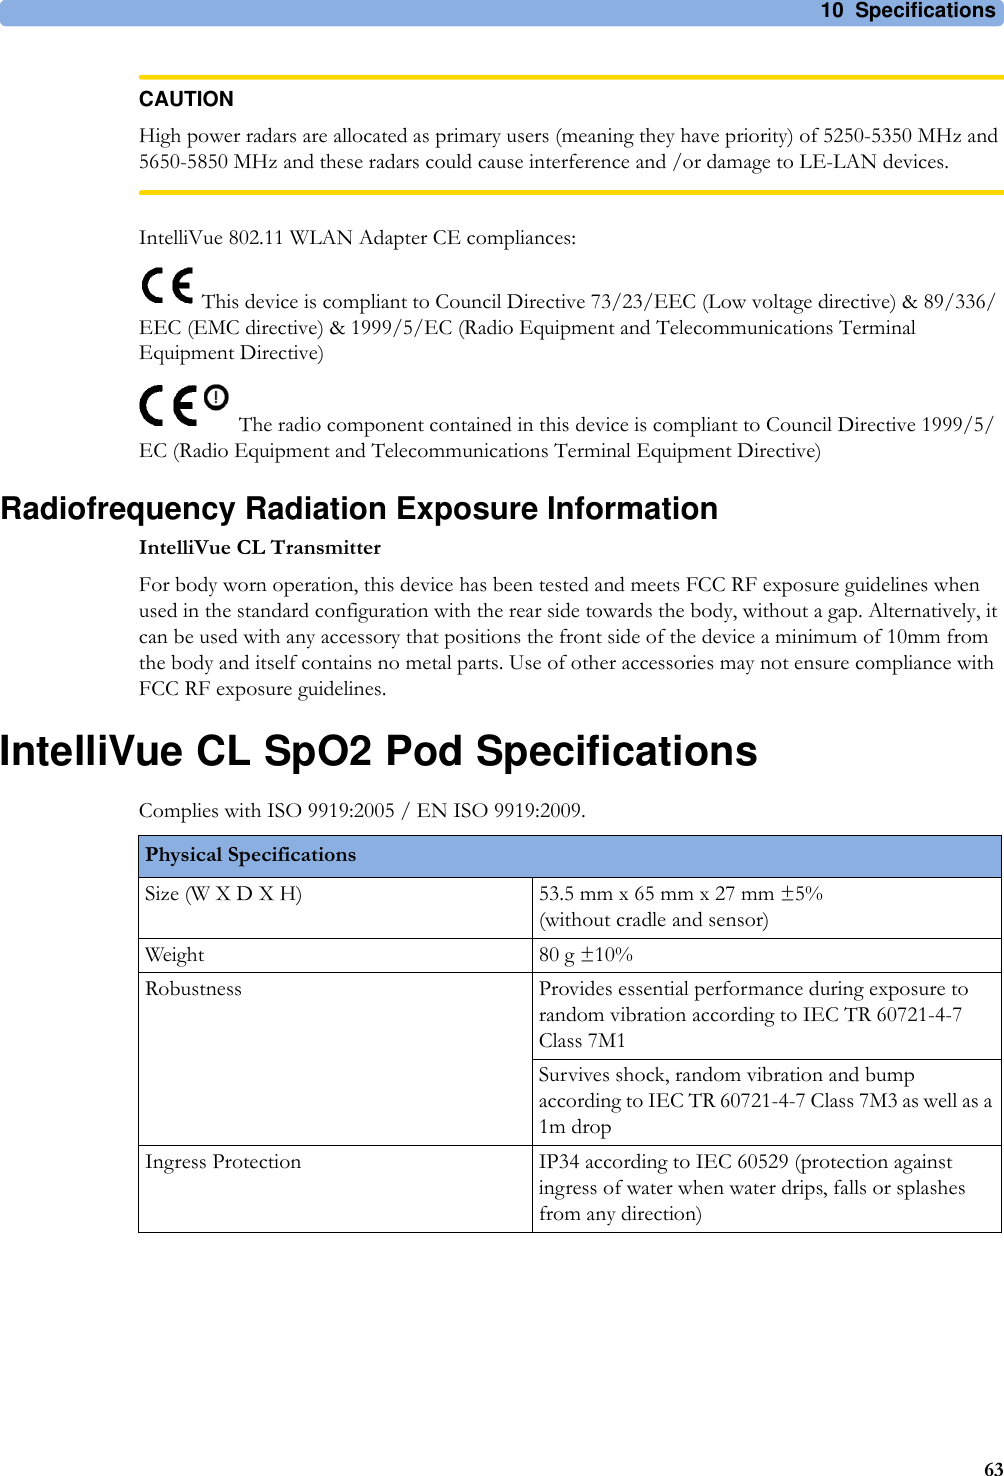 10 Specifications63CAUTIONHigh power radars are allocated as primary users (meaning they have priority) of 5250-5350 MHz and 5650-5850 MHz and these radars could cause interference and /or damage to LE-LAN devices.IntelliVue 802.11 WLAN Adapter CE compliances: This device is compliant to Council Directive 73/23/EEC (Low voltage directive) &amp; 89/336/EEC (EMC directive) &amp; 1999/5/EC (Radio Equipment and Telecommunications Terminal Equipment Directive)The radio component contained in this device is compliant to Council Directive 1999/5/EC (Radio Equipment and Telecommunications Terminal Equipment Directive)Radiofrequency Radiation Exposure InformationIntelliVue CL TransmitterFor body worn operation, this device has been tested and meets FCC RF exposure guidelines when used in the standard configuration with the rear side towards the body, without a gap. Alternatively, it can be used with any accessory that positions the front side of the device a minimum of 10mm from the body and itself contains no metal parts. Use of other accessories may not ensure compliance with FCC RF exposure guidelines.IntelliVue CL SpO2 Pod SpecificationsComplies with ISO 9919:2005 / EN ISO 9919:2009.Physical SpecificationsSize (W X D X H) 53.5 mm x 65 mm x 27 mm ±5%(without cradle and sensor)Weight 80 g ±10%Robustness Provides essential performance during exposure to random vibration according to IEC TR 60721-4-7 Class 7M1Survives shock, random vibration and bump according to IEC TR 60721-4-7 Class 7M3 as well as a 1m dropIngress Protection IP34 according to IEC 60529 (protection against ingress of water when water drips, falls or splashes from any direction)